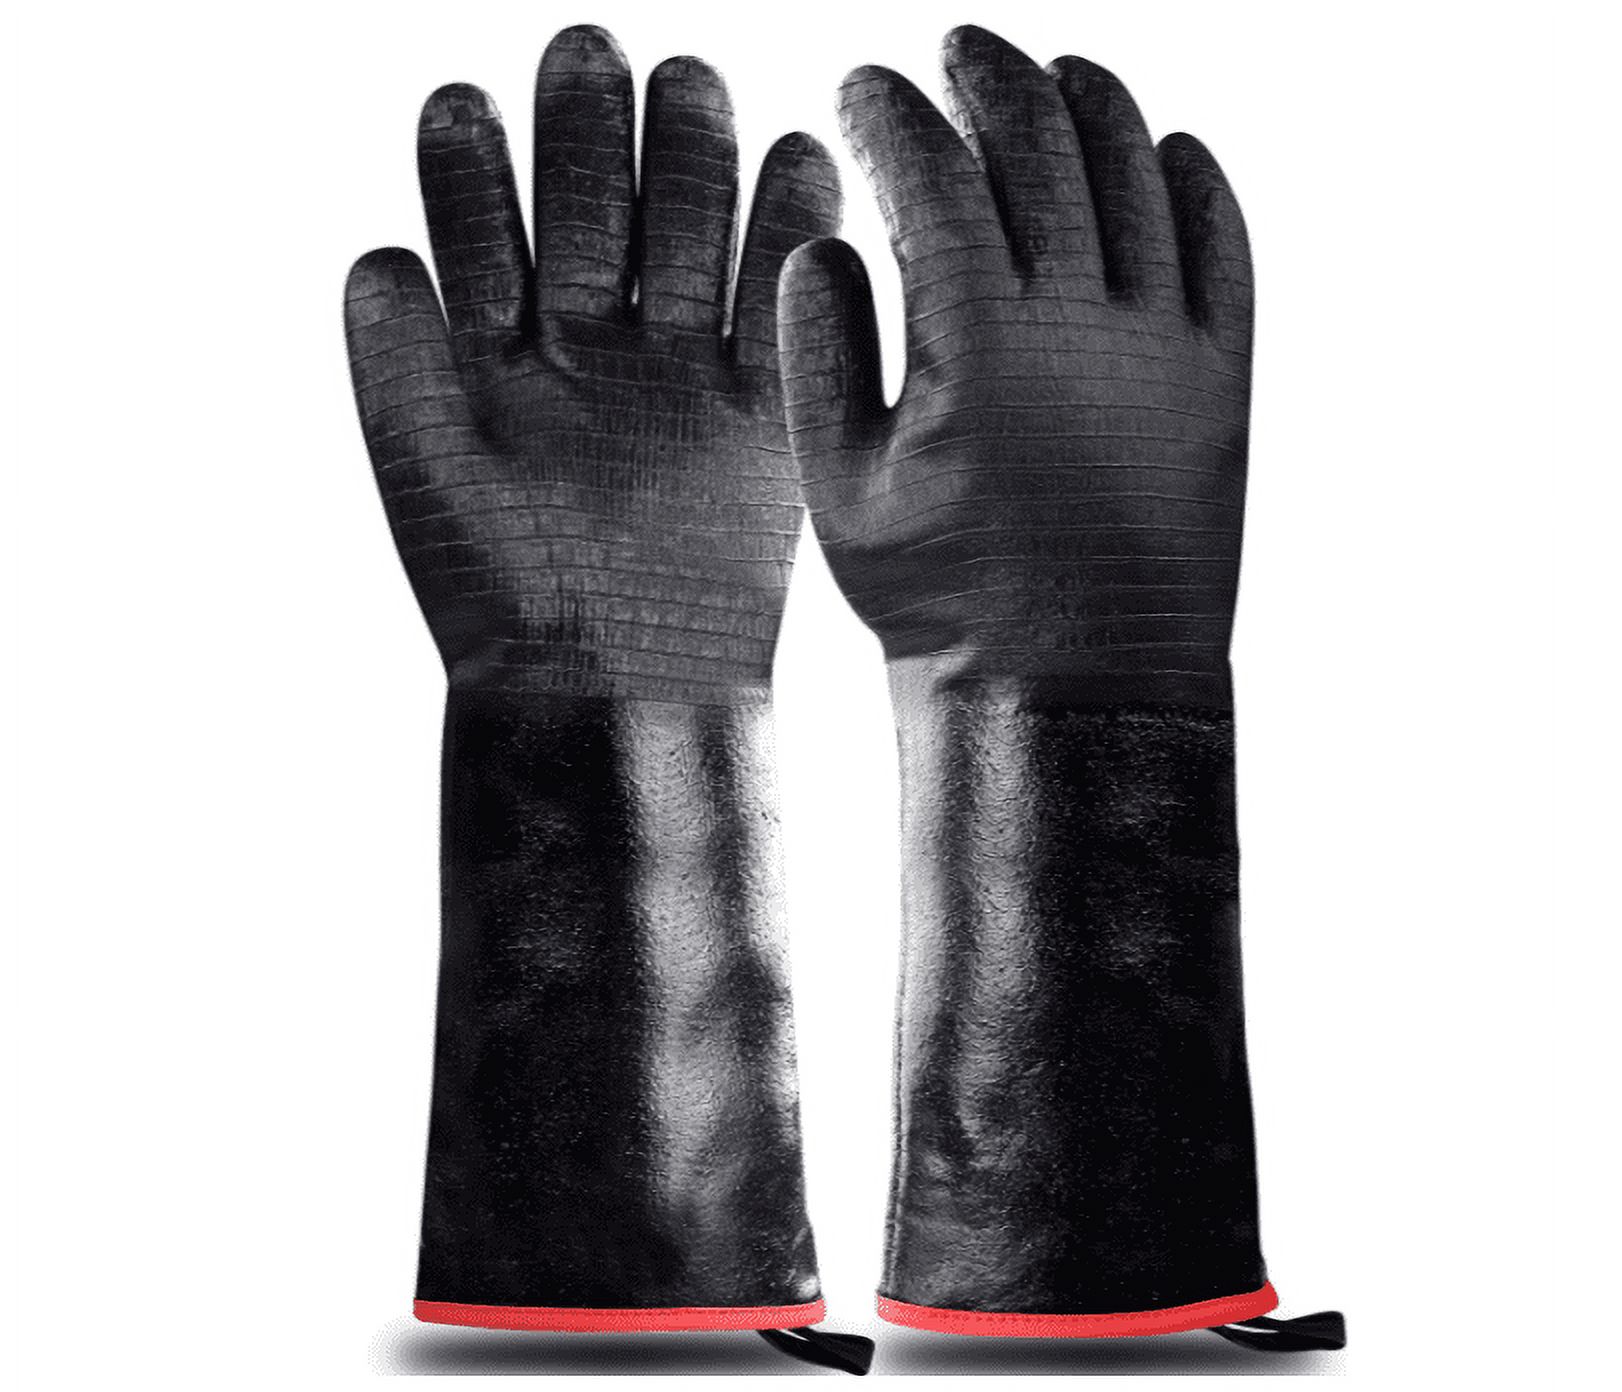 Heat Resistant-Smoker BBQ Gloves 18 Inches,932℉, Grill, Cooking Barbecue Gloves, to Handling Heat Food Right on Your Fryer,Grill,Oven. Waterproof, Fireproof, Oil Resistant Neoprene Coating - image 1 of 7